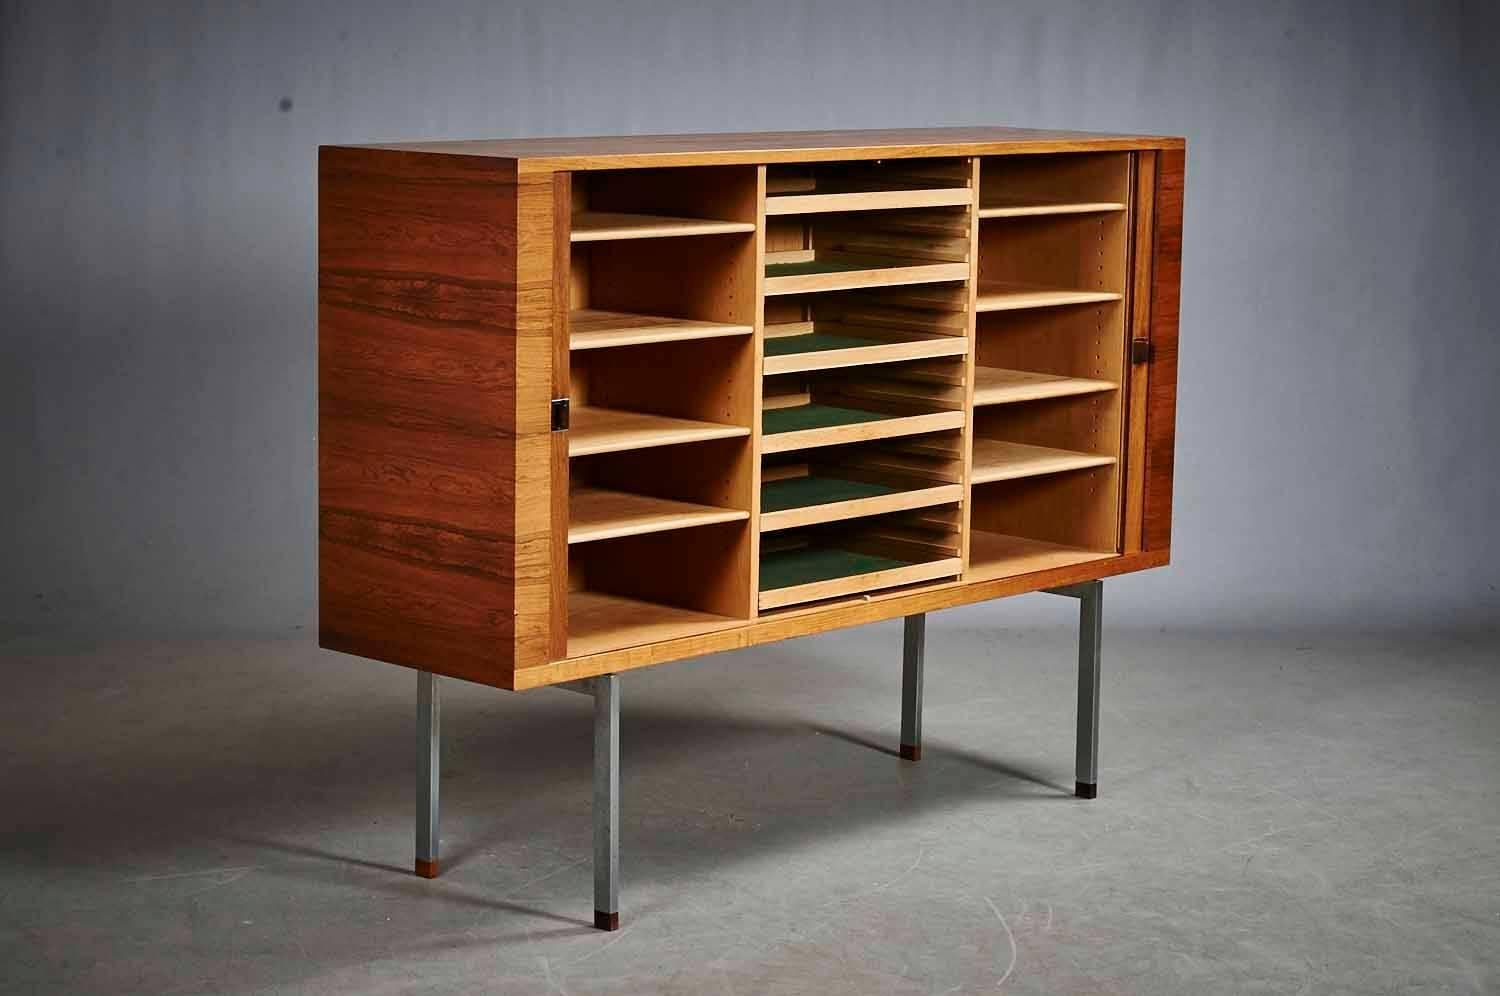 A large and rare “President” sideboard by Hans J. Wegner in rosewood and chrome metal made by Ry Mobler.

Sideboard in rosewood with two tambour doors enclosing shelves and sliding trays. Stainless steel handles and frame with rosewood leg ends.